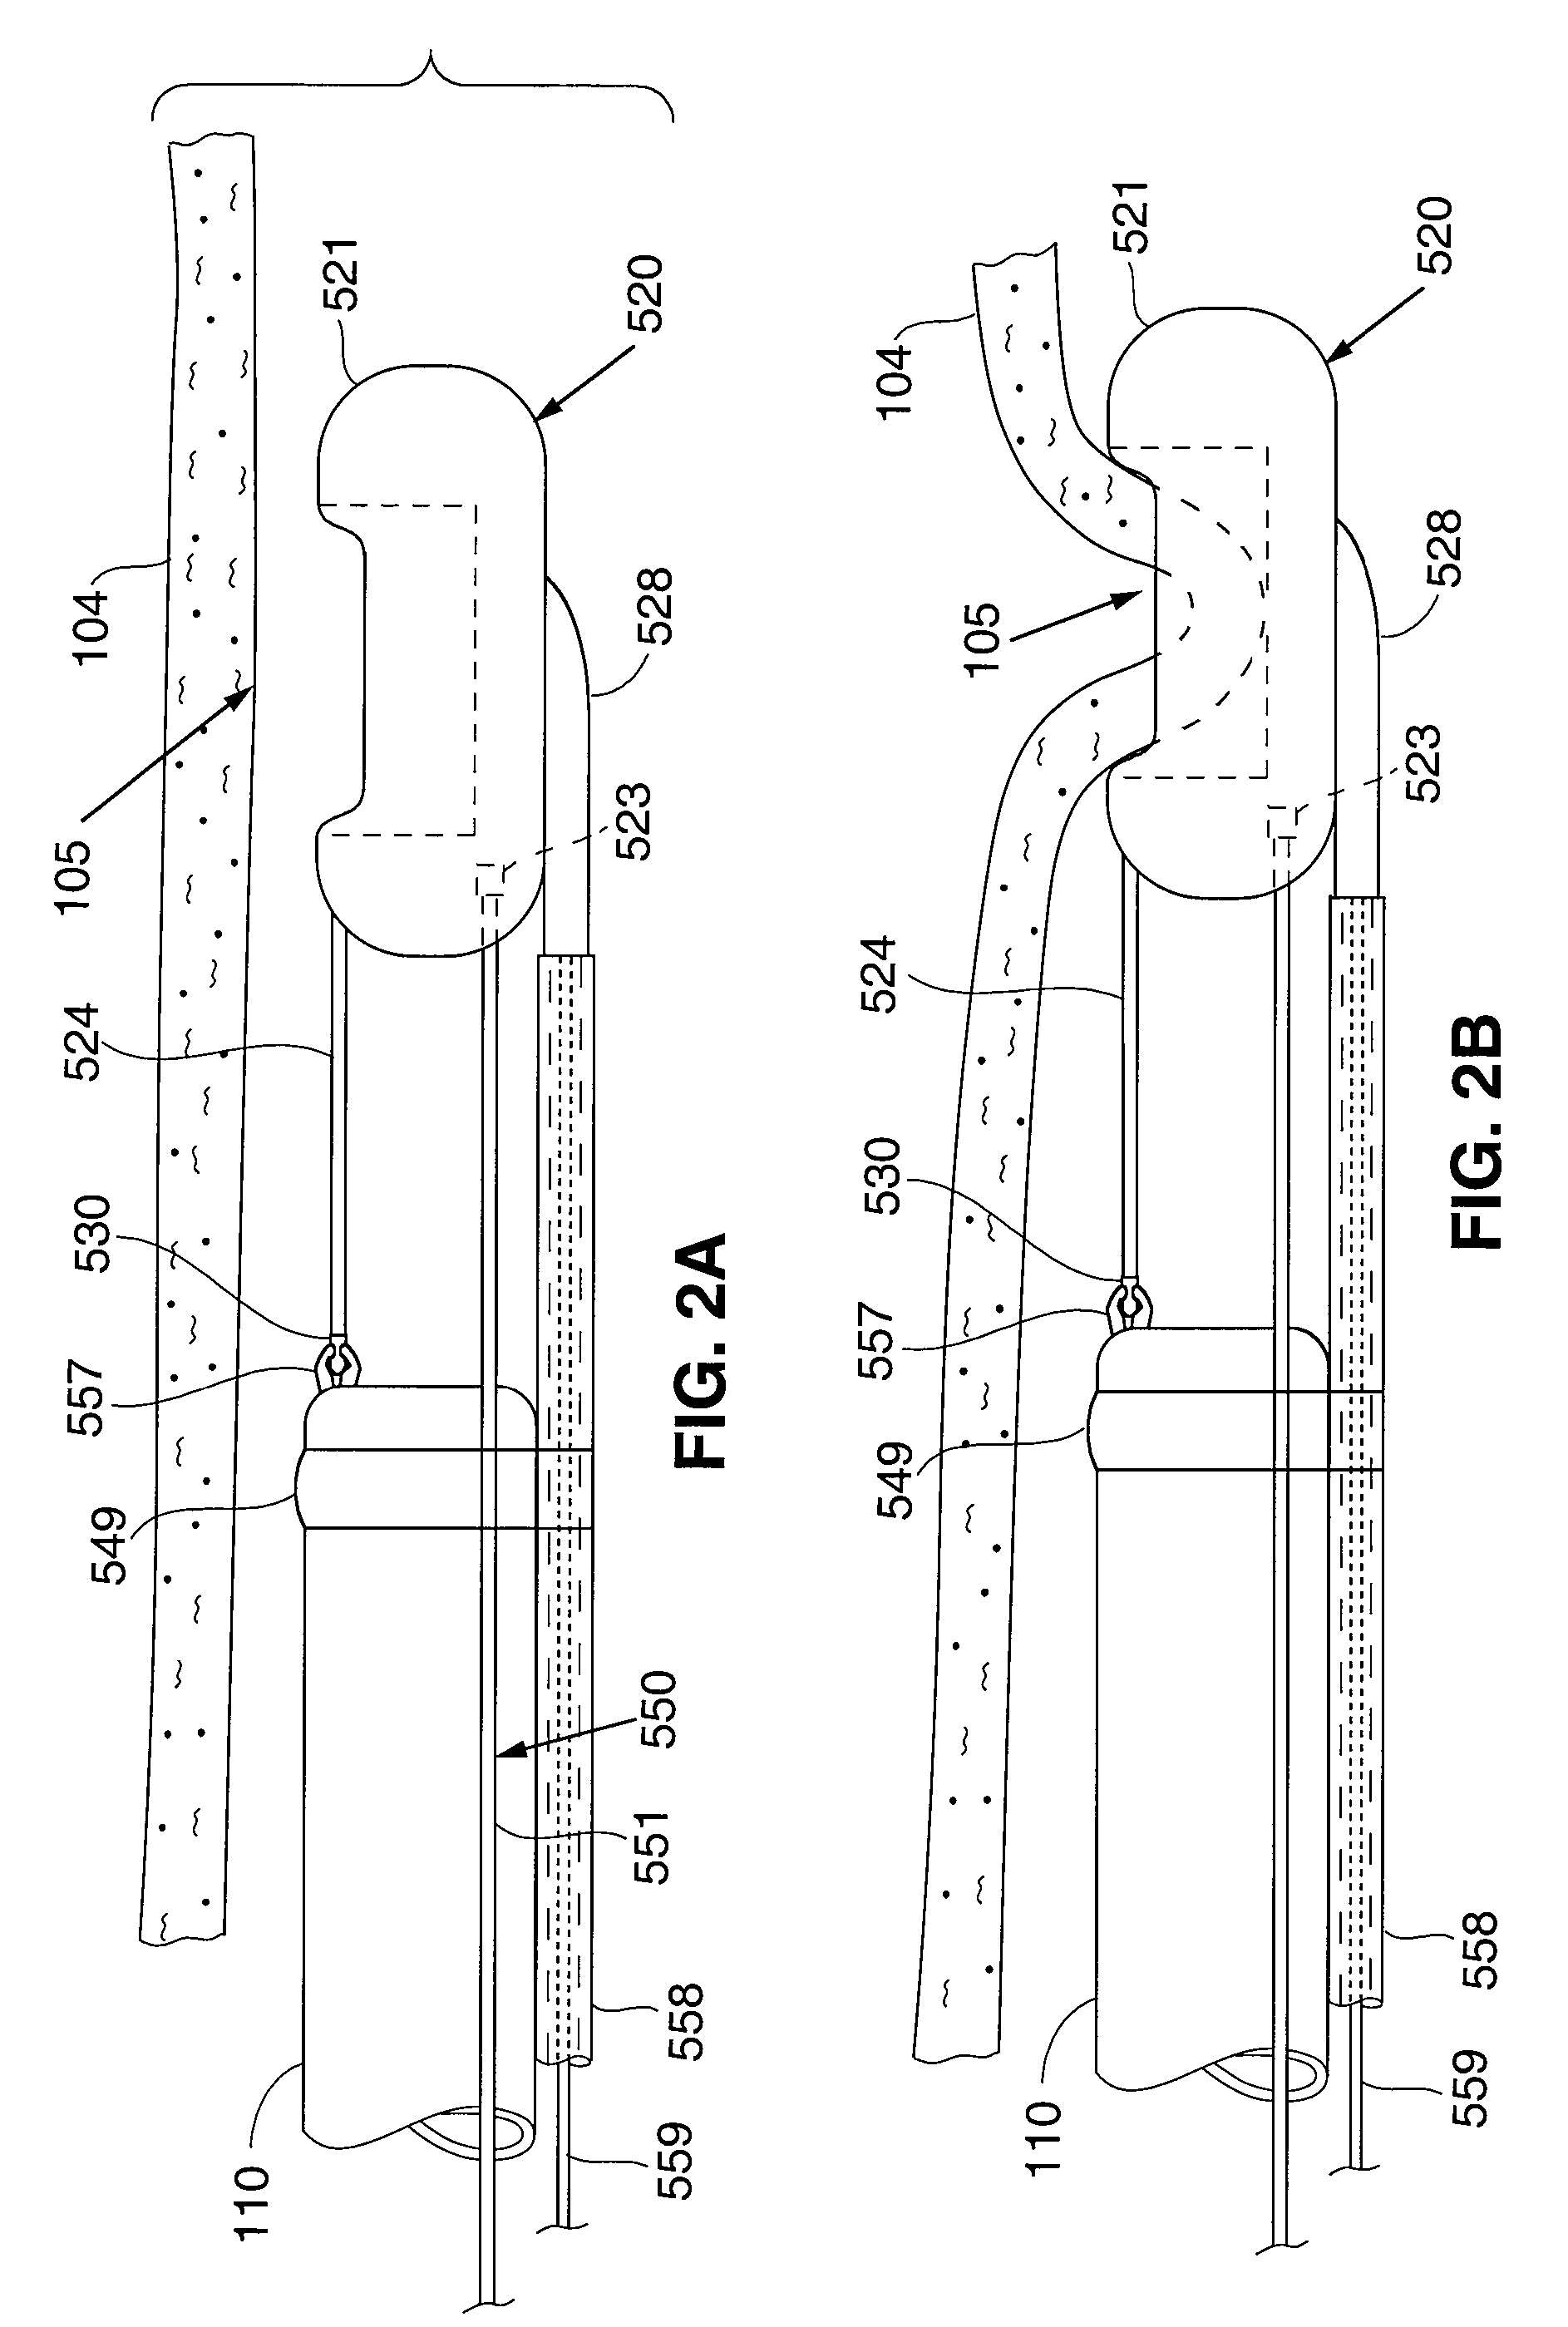 Endoscopic Instrument for Engaging a Device